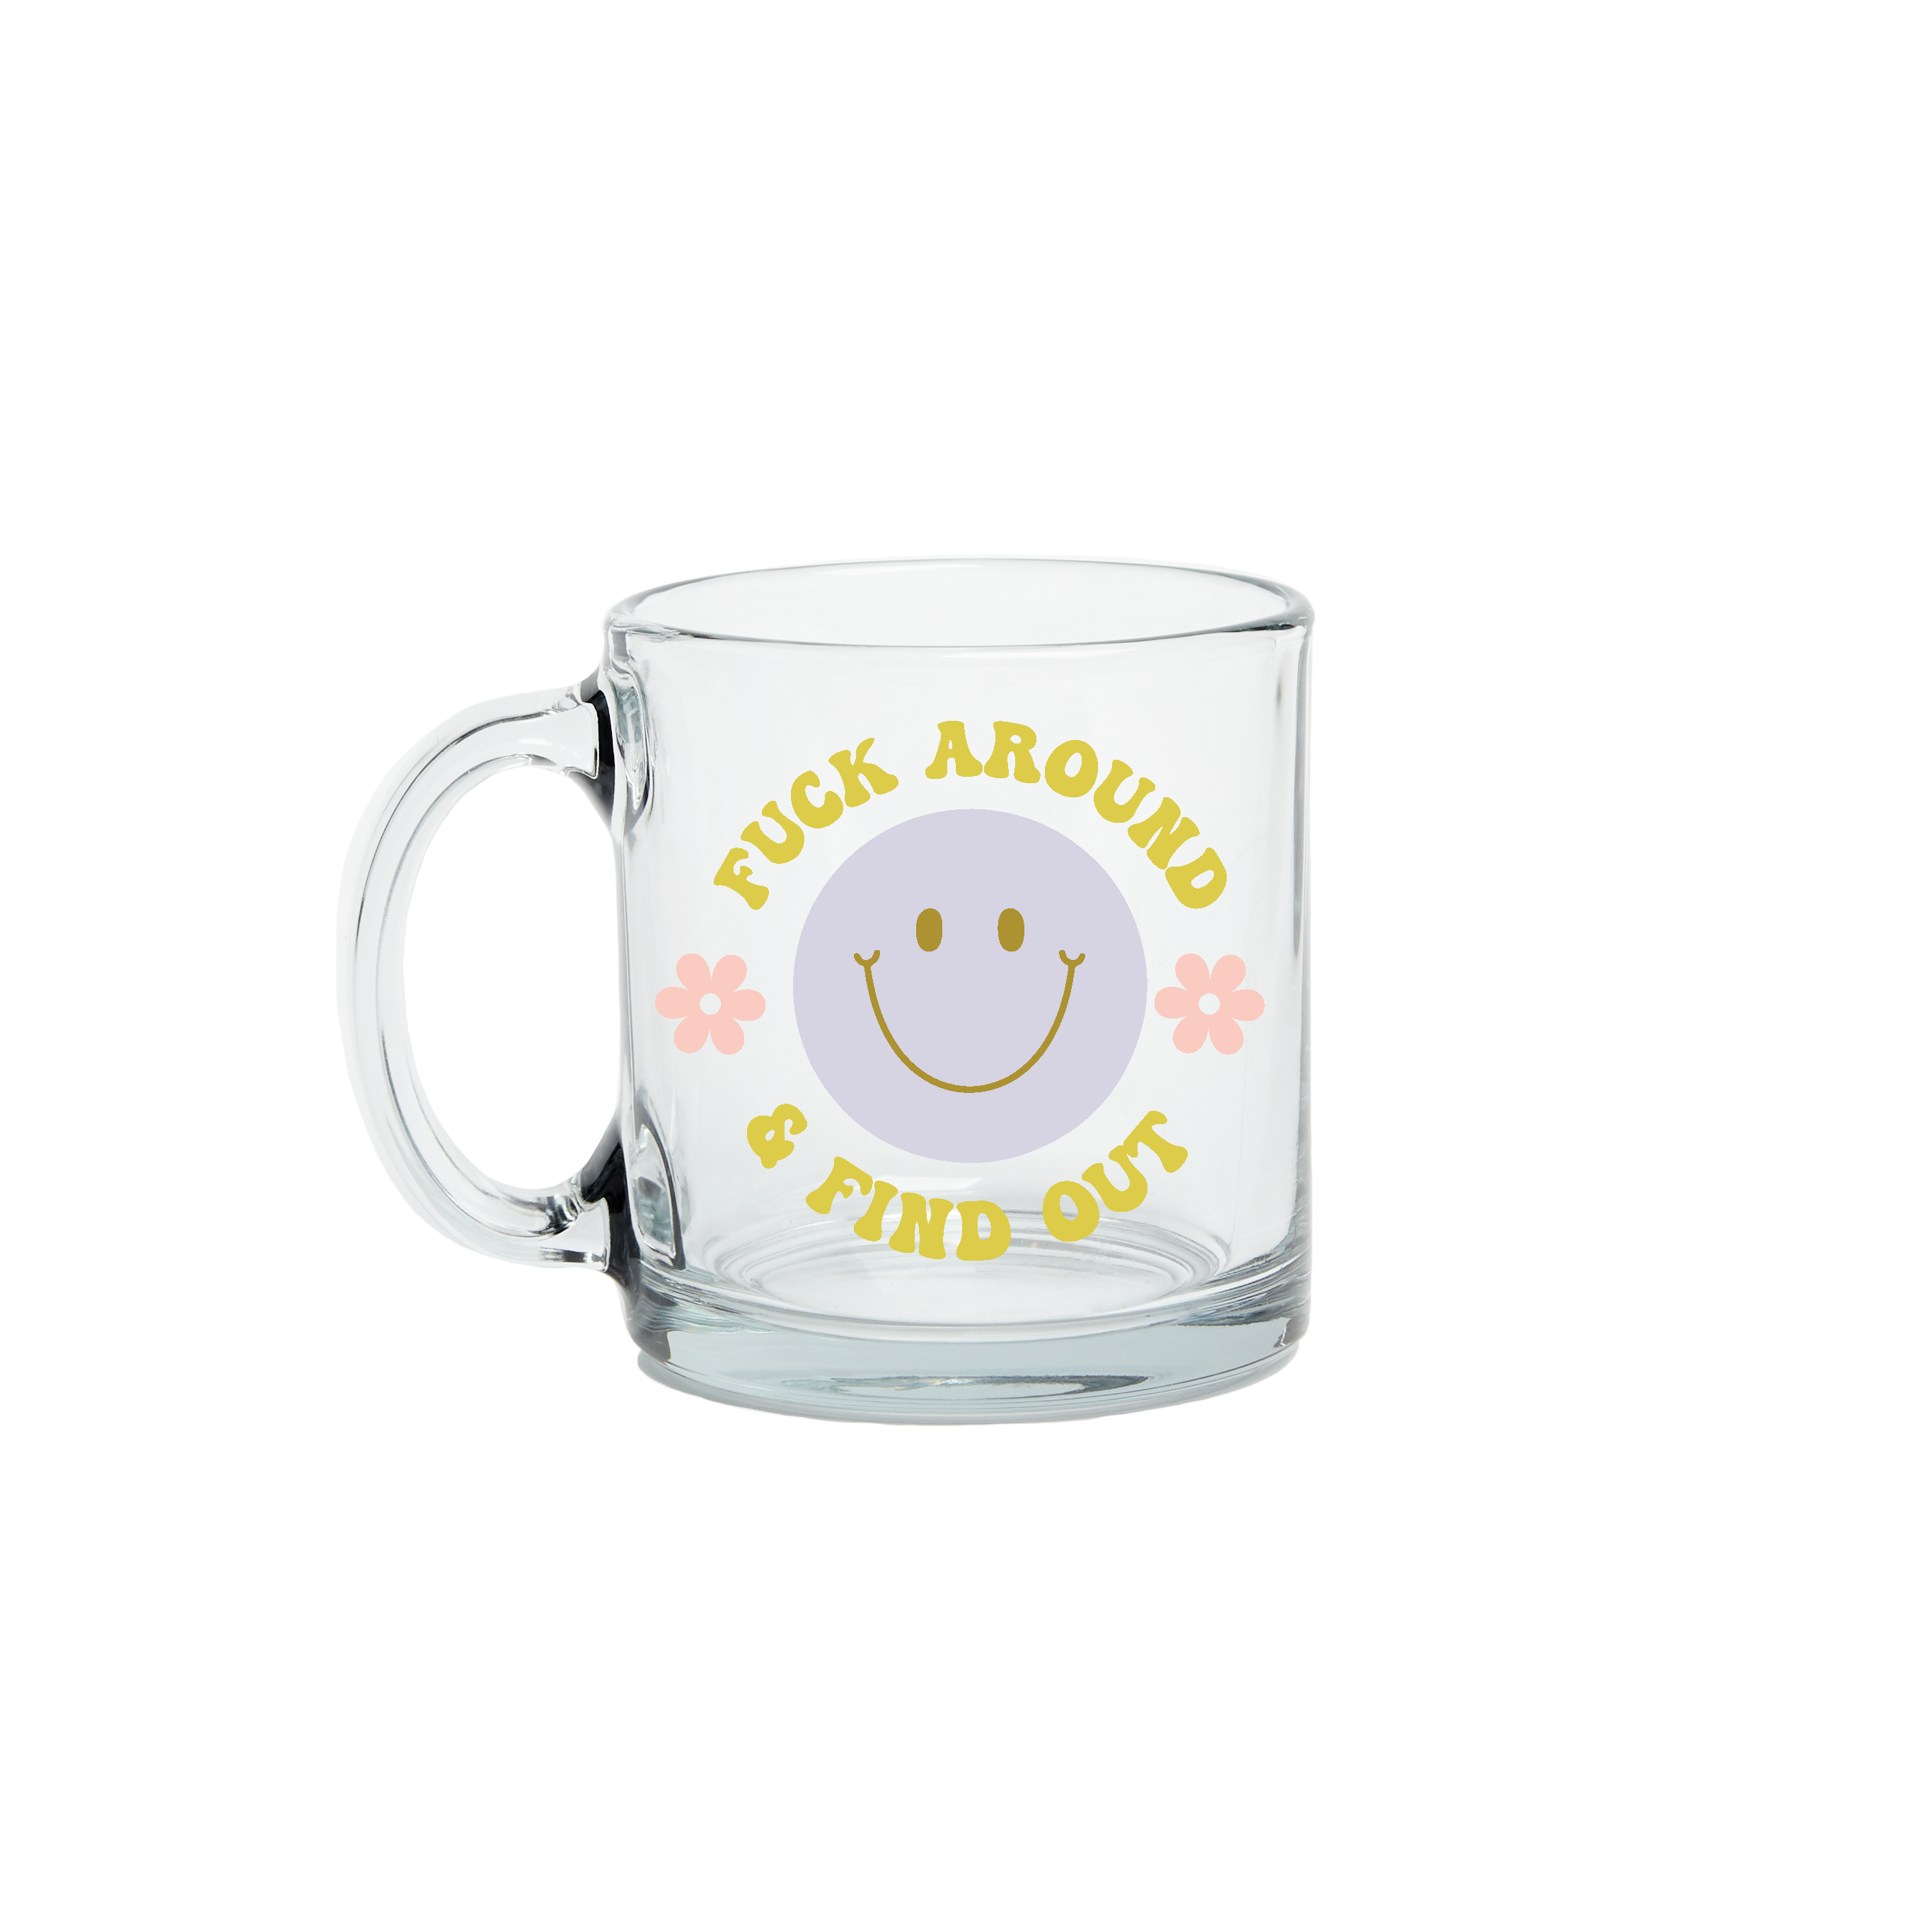 Chez Gagné - Hilarious Large Coffee Mug - 16oz - Fuck Around. Find Out.